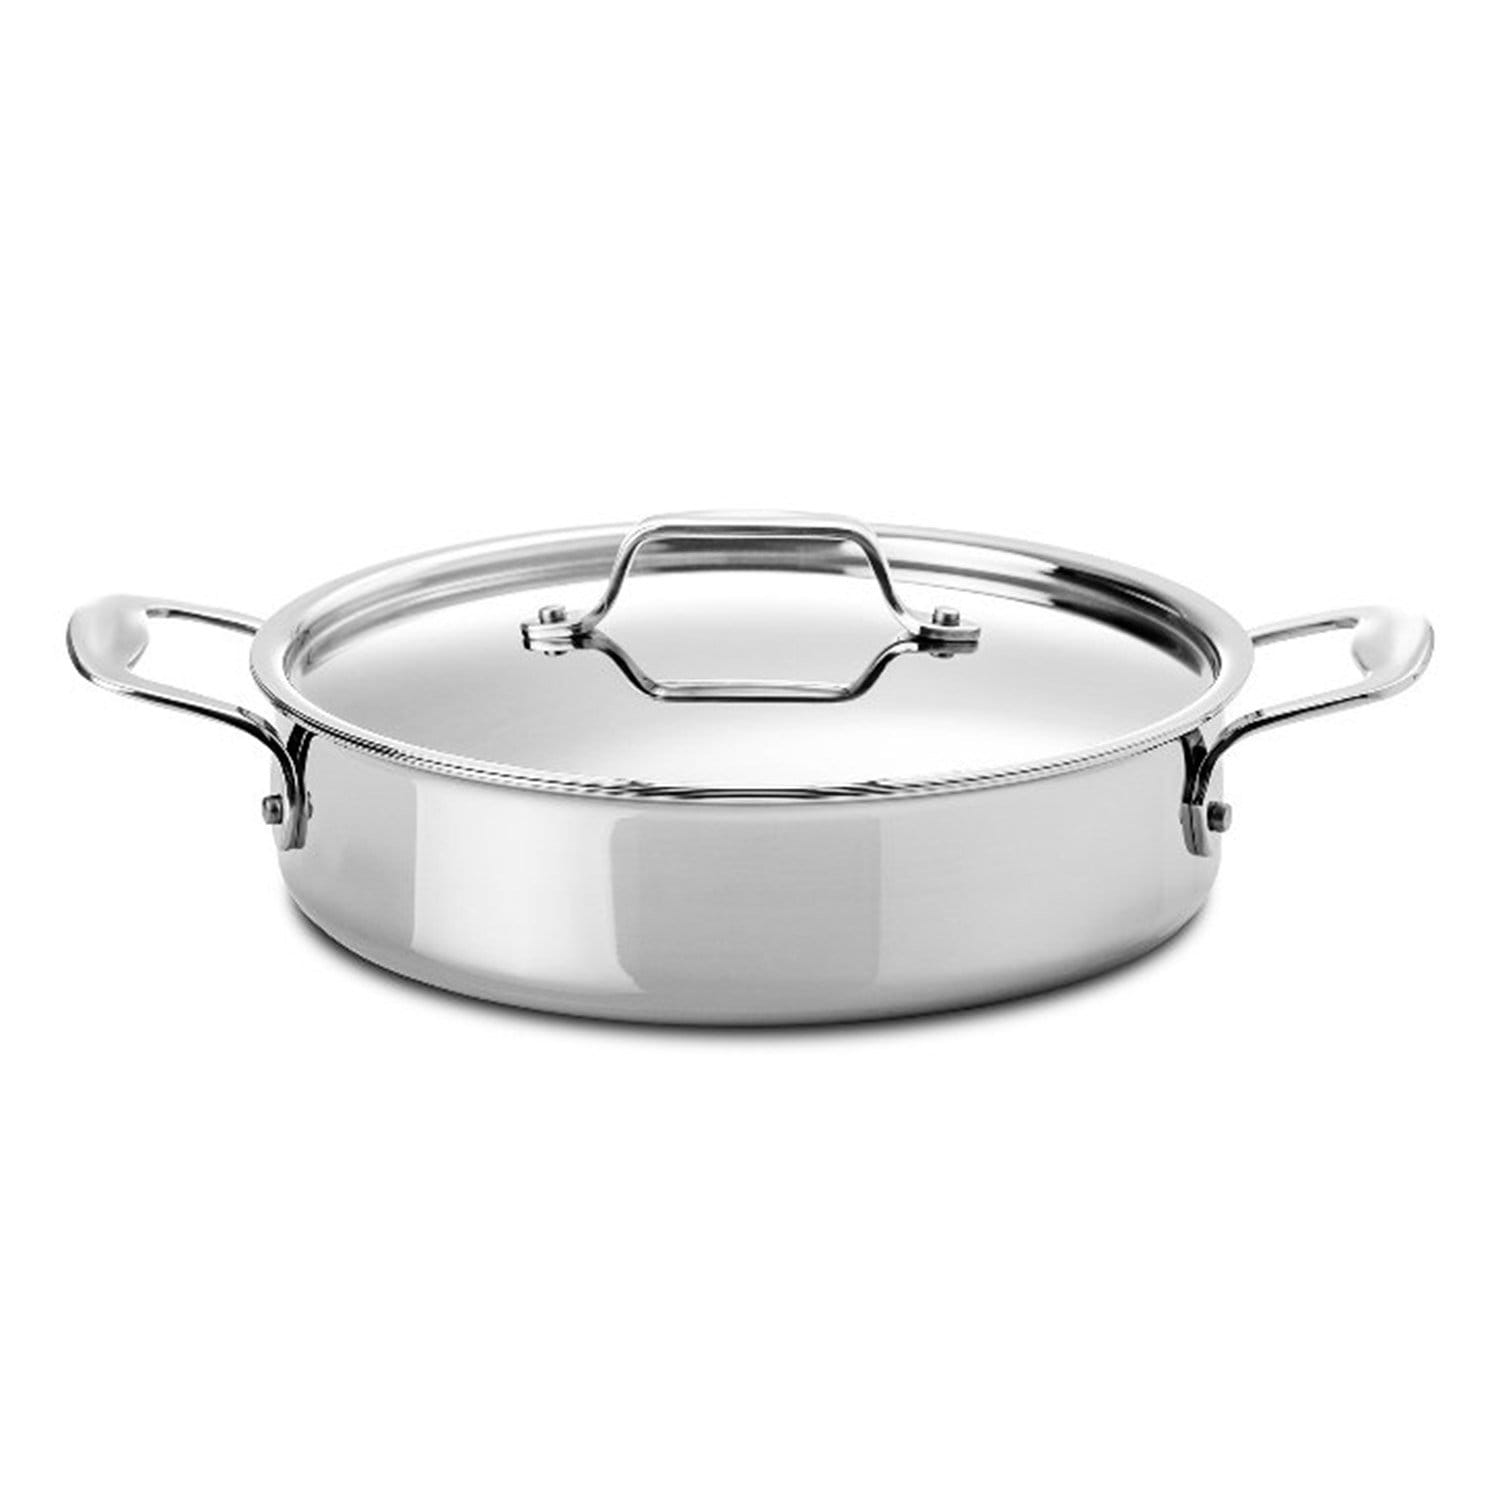 Silampos Supremeprof Low Casserole with Lid - Silver, 24 cm - 639002BG0924 - Jashanmal Home